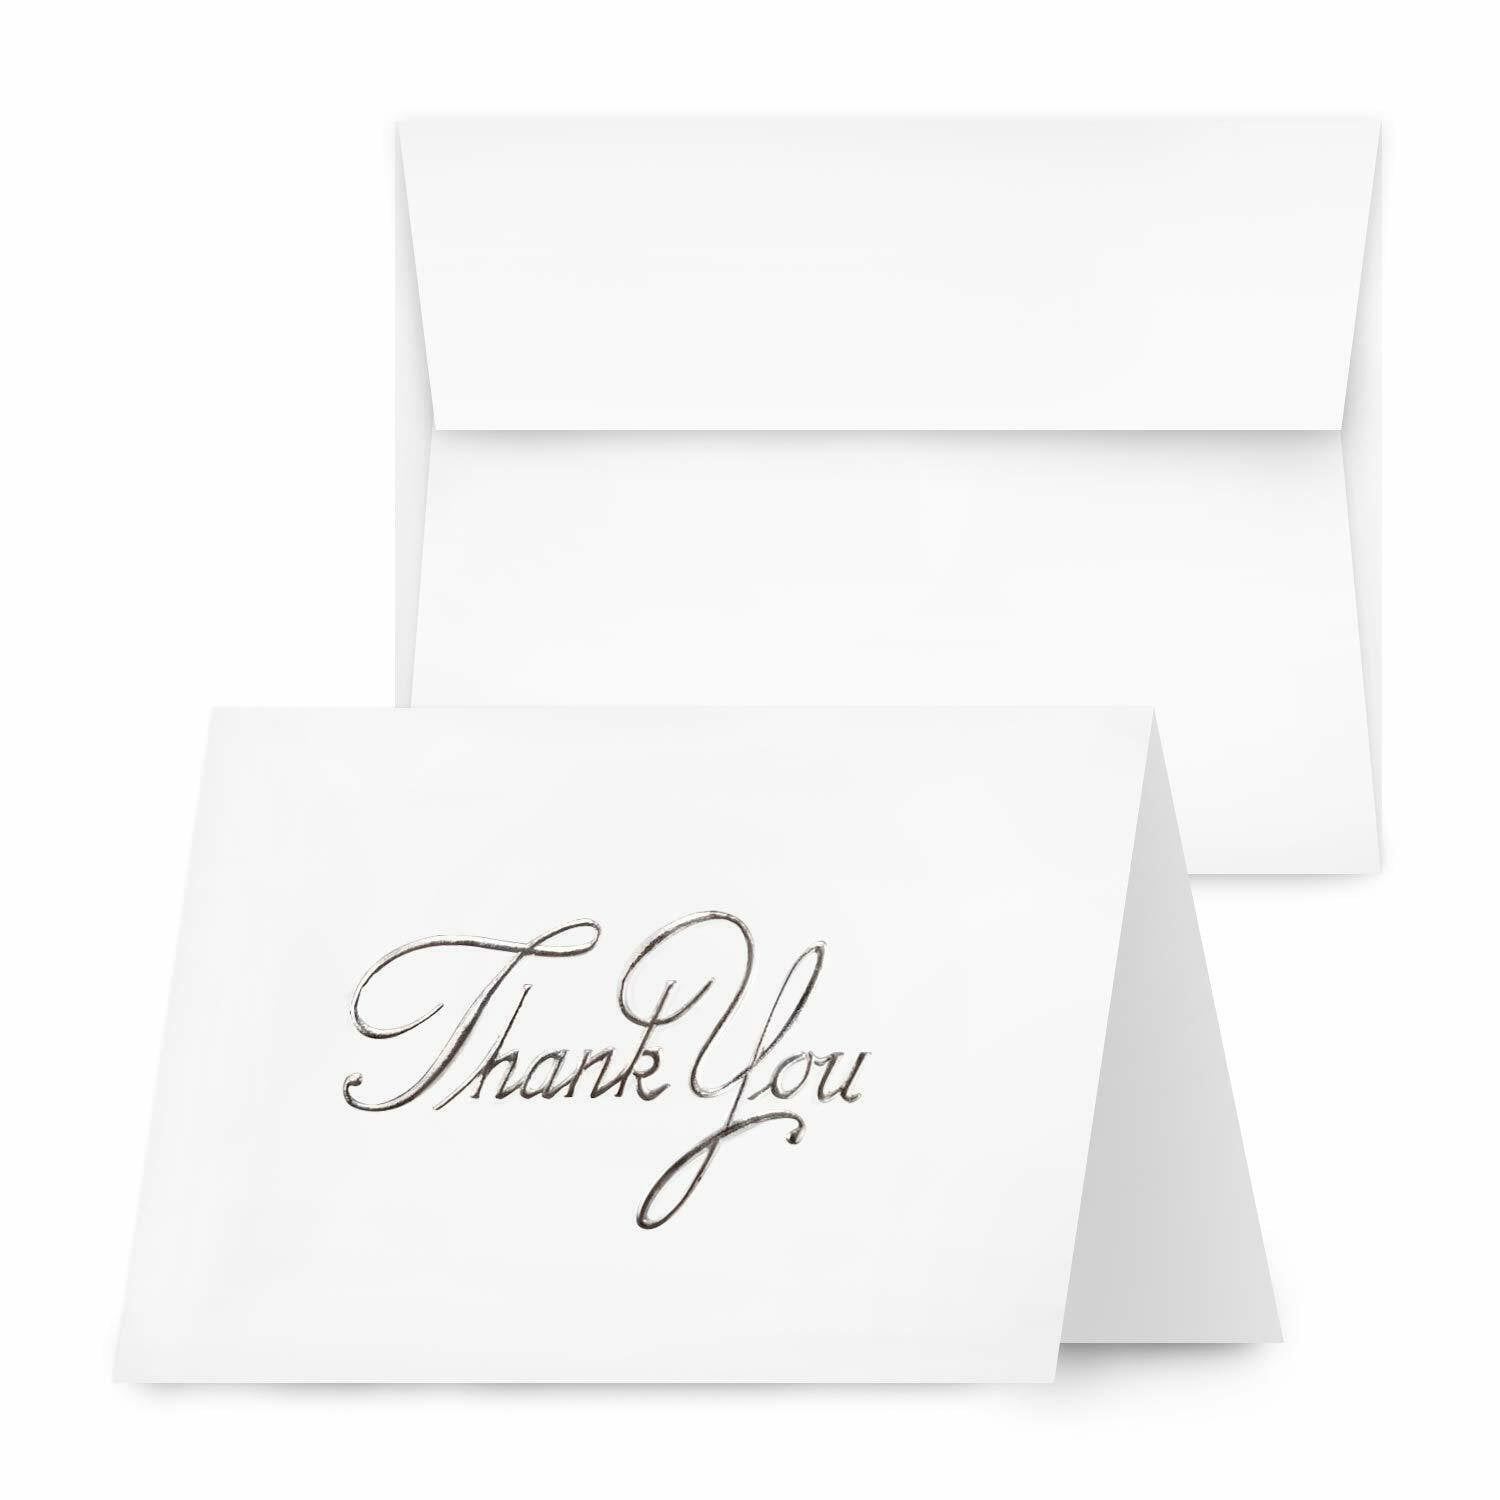 All Occasion Invitations & Thank You Cards Matched Set with Envelopes 50 of Each Elegant Blue Stripe Fill-in-Style Invites & Folded Thank You Notes Graduation Birthday Wedding Shower Great Value 